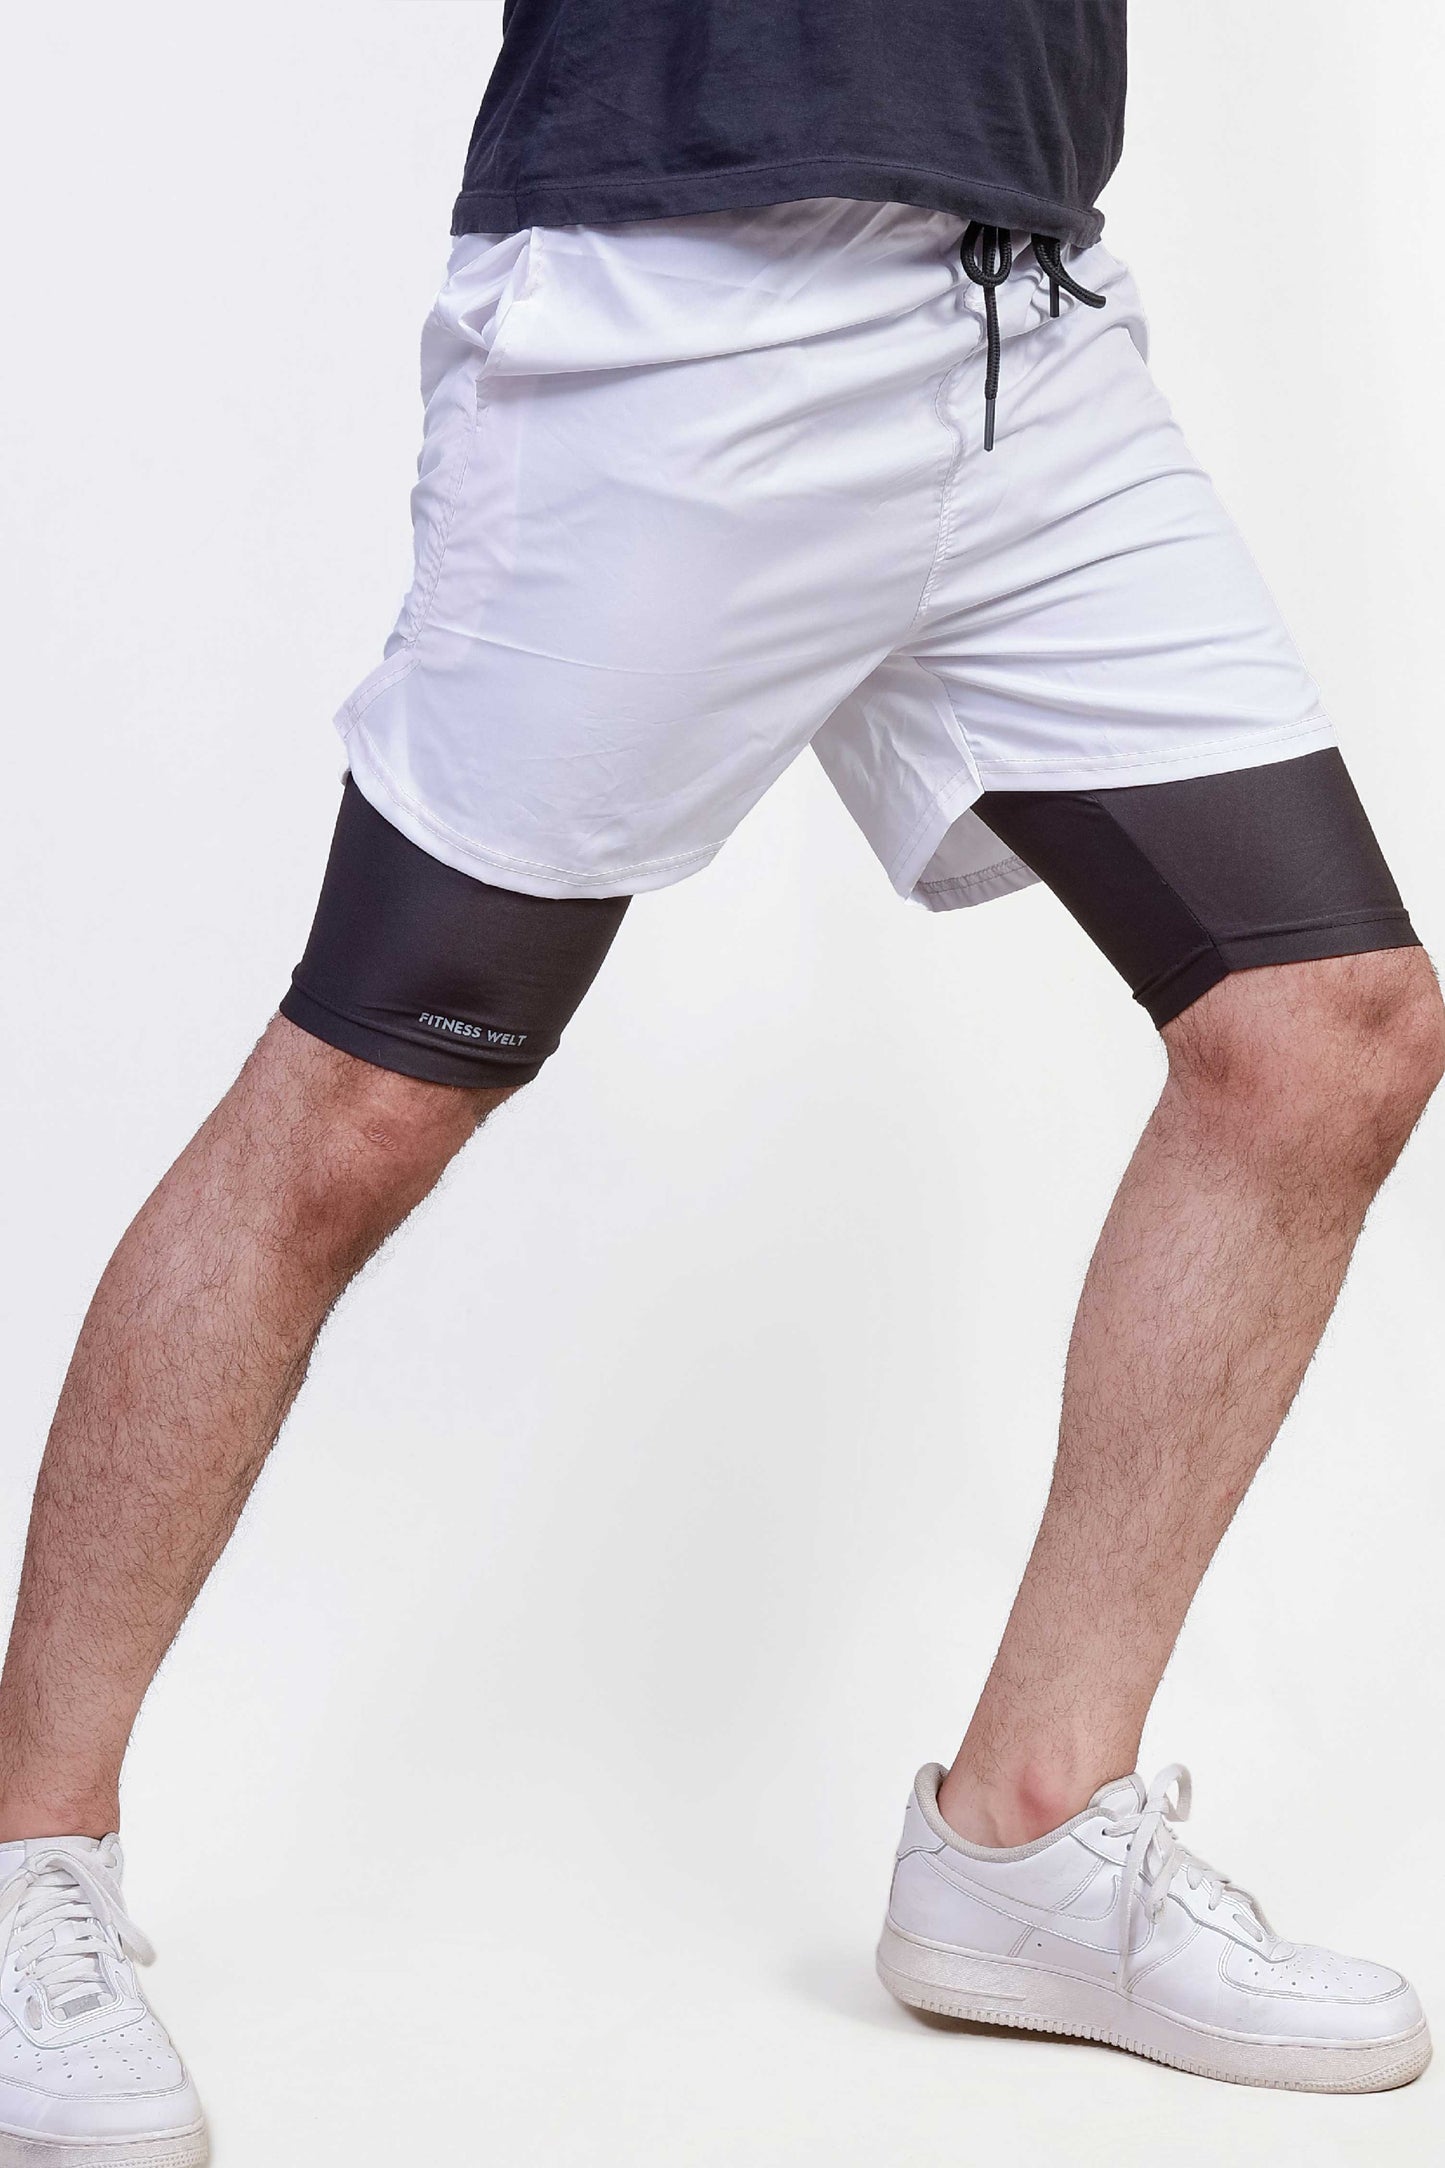 Fitness Welt Athletic Compression Shorts White